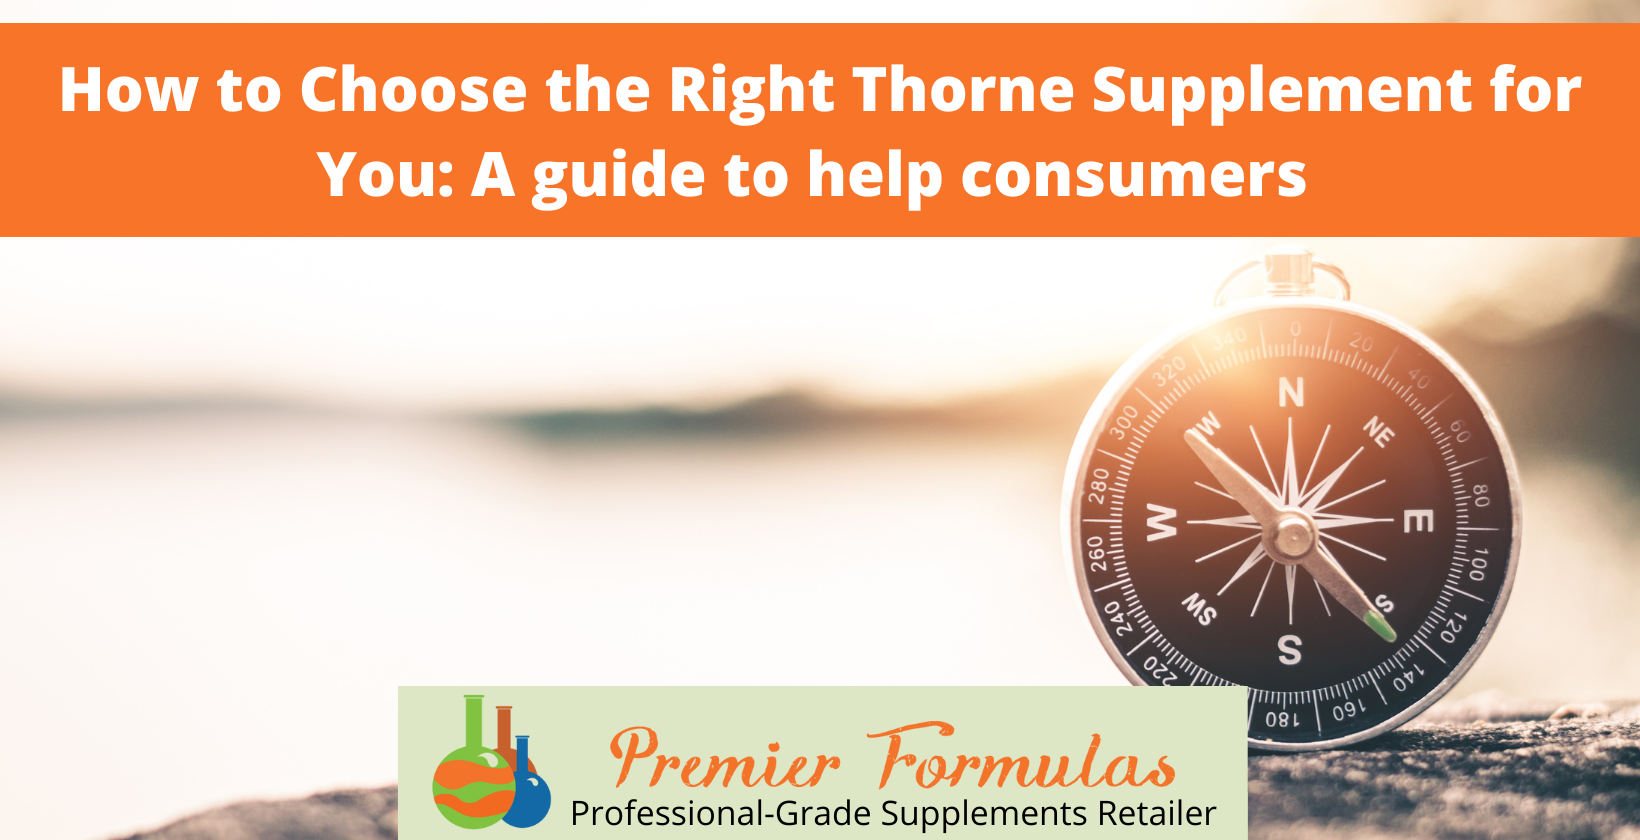 How to Choose the Right Thorne Supplement for You A guide to help consumers